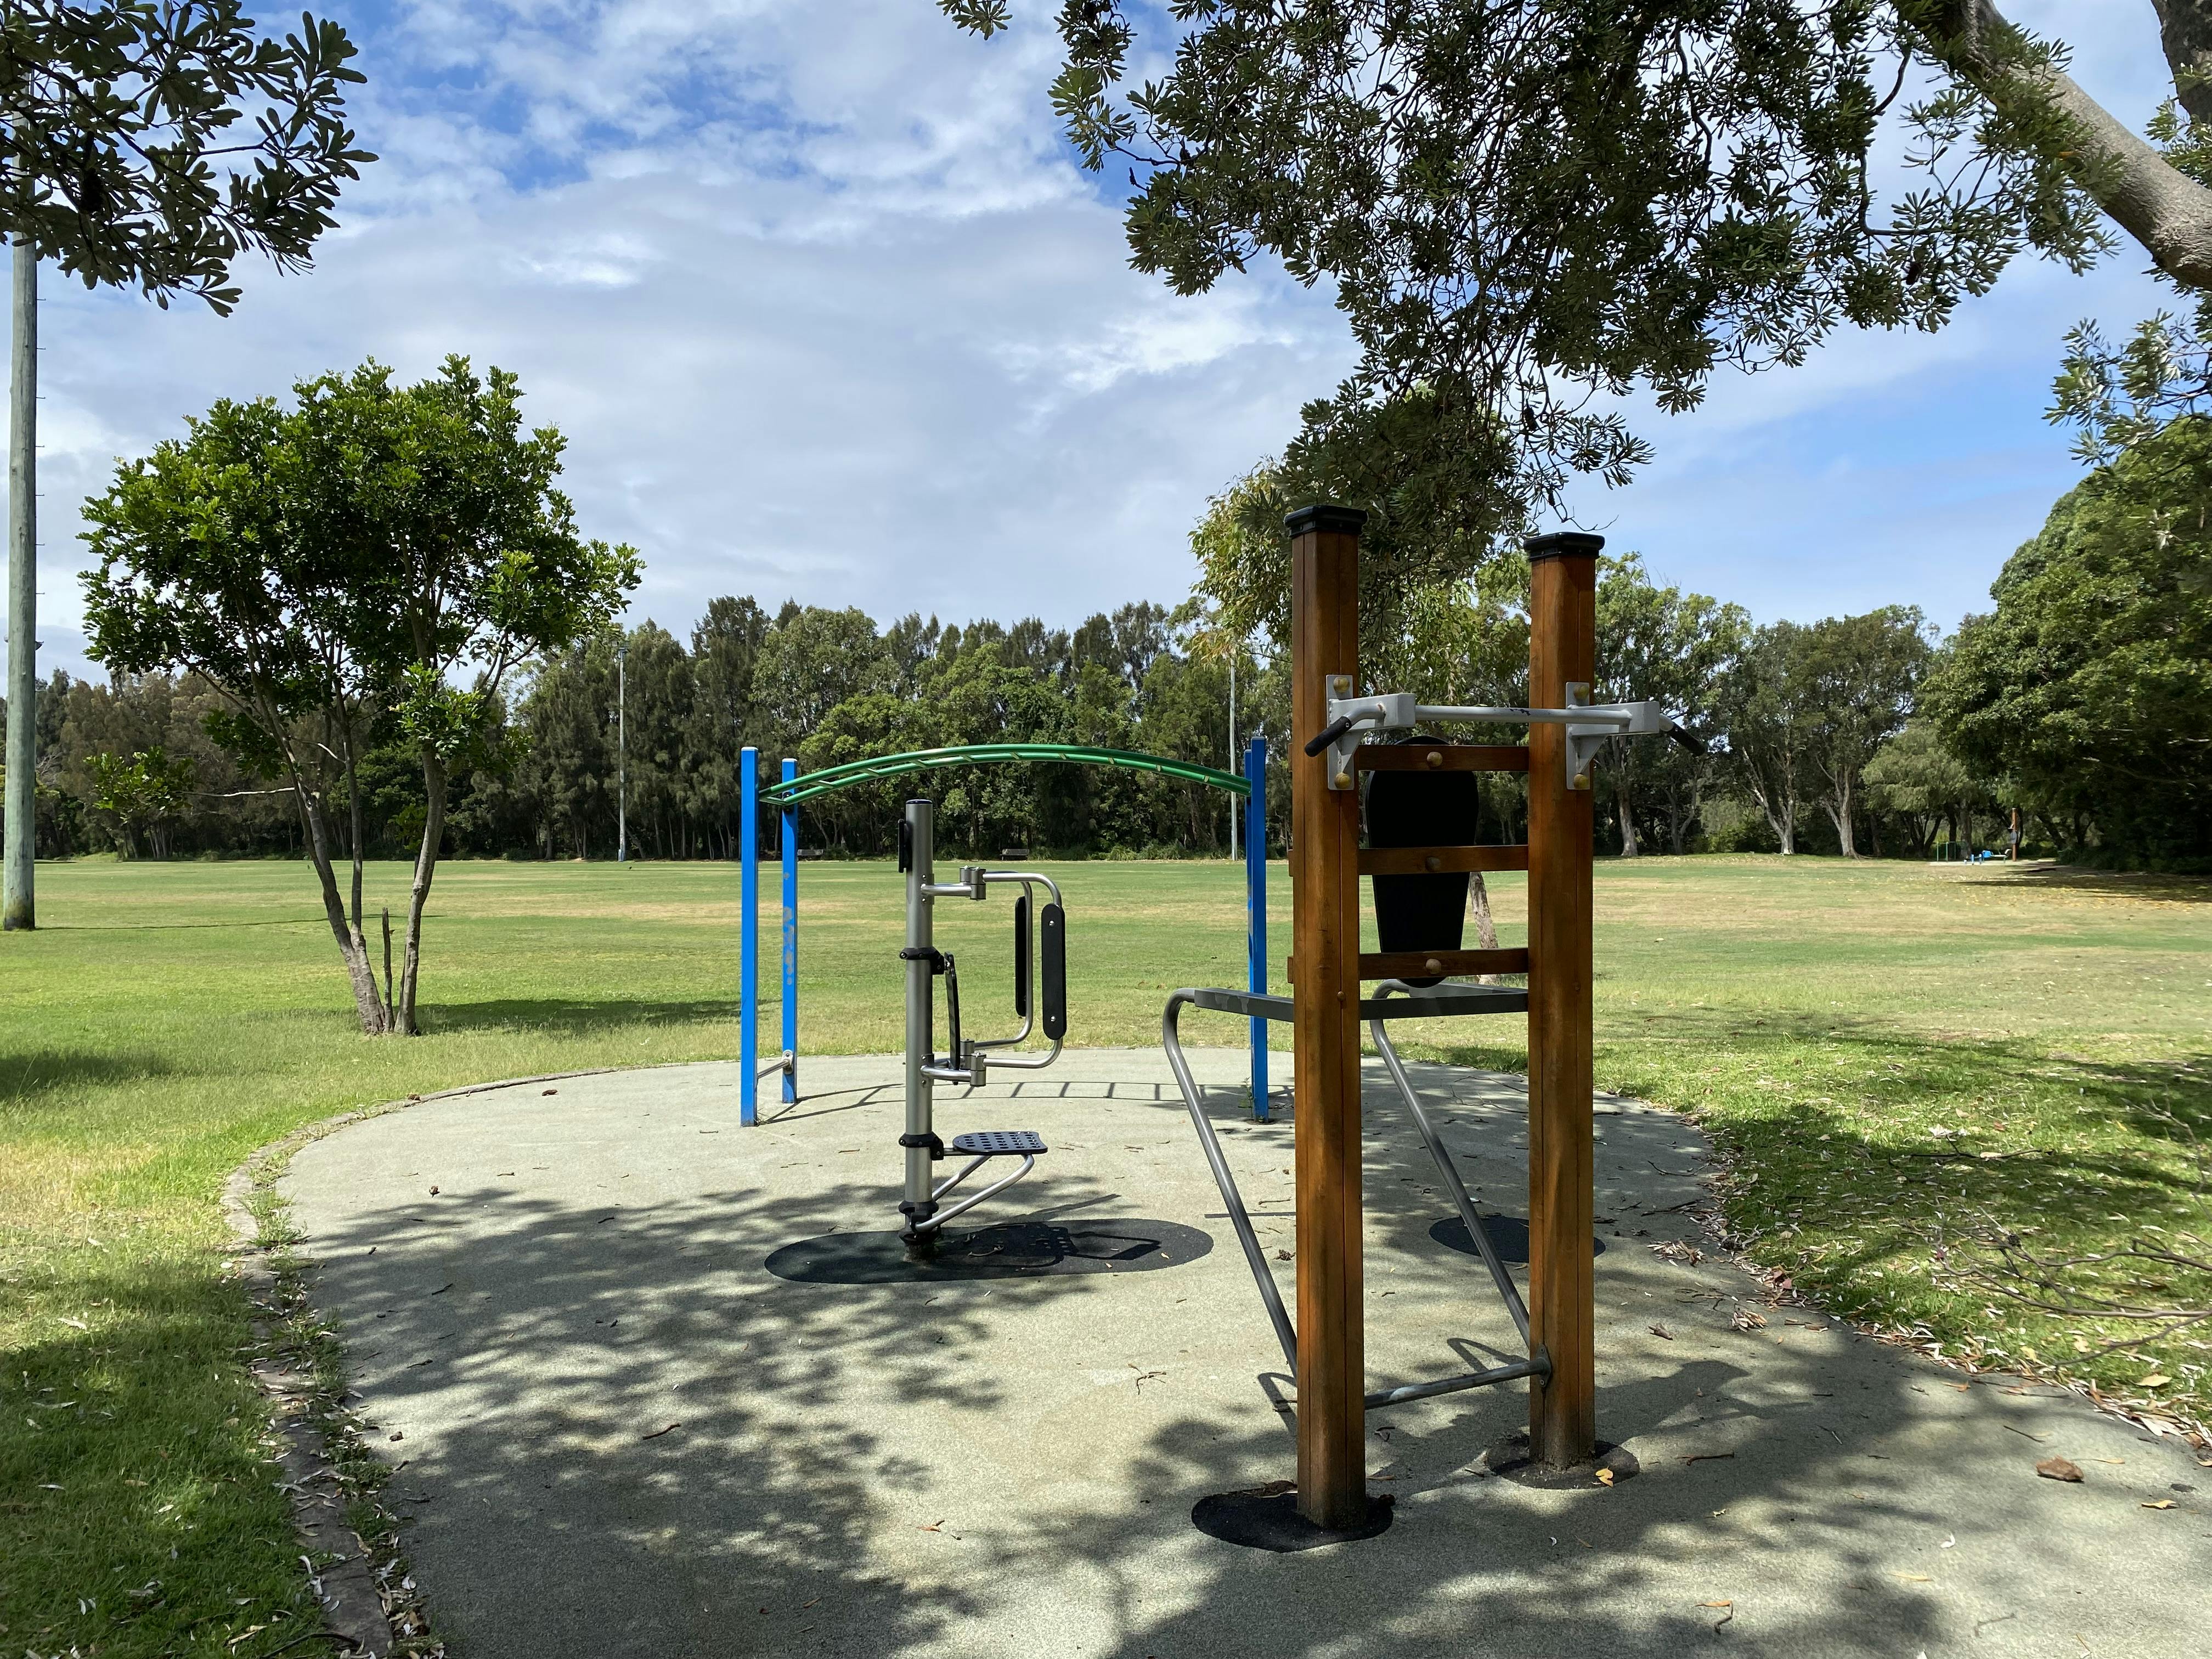 Fitness equipment at the southern end of Marton Park